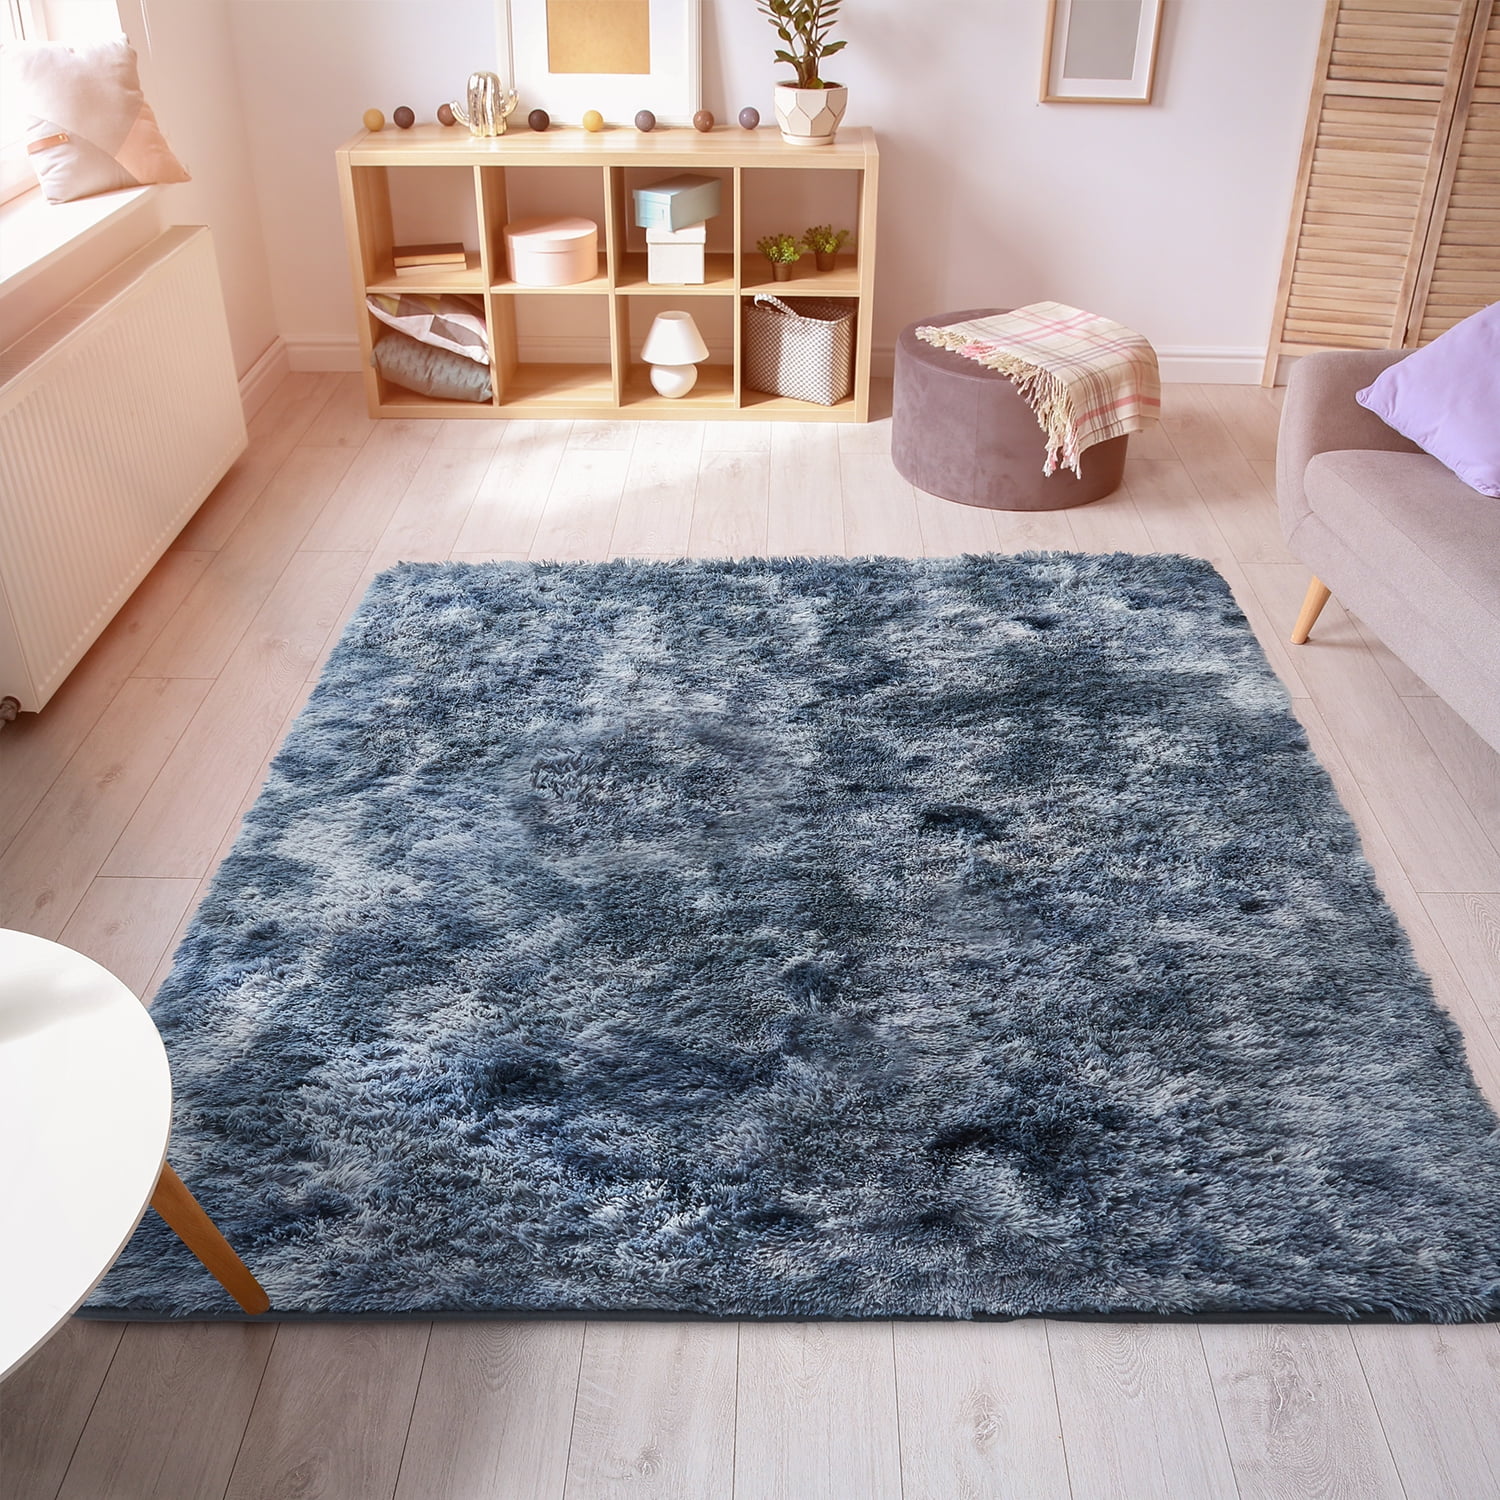 Ophanie Rugs for Bedroom Living Room, 4x5.3 Area Rug Grey Fluffy Fuzzy